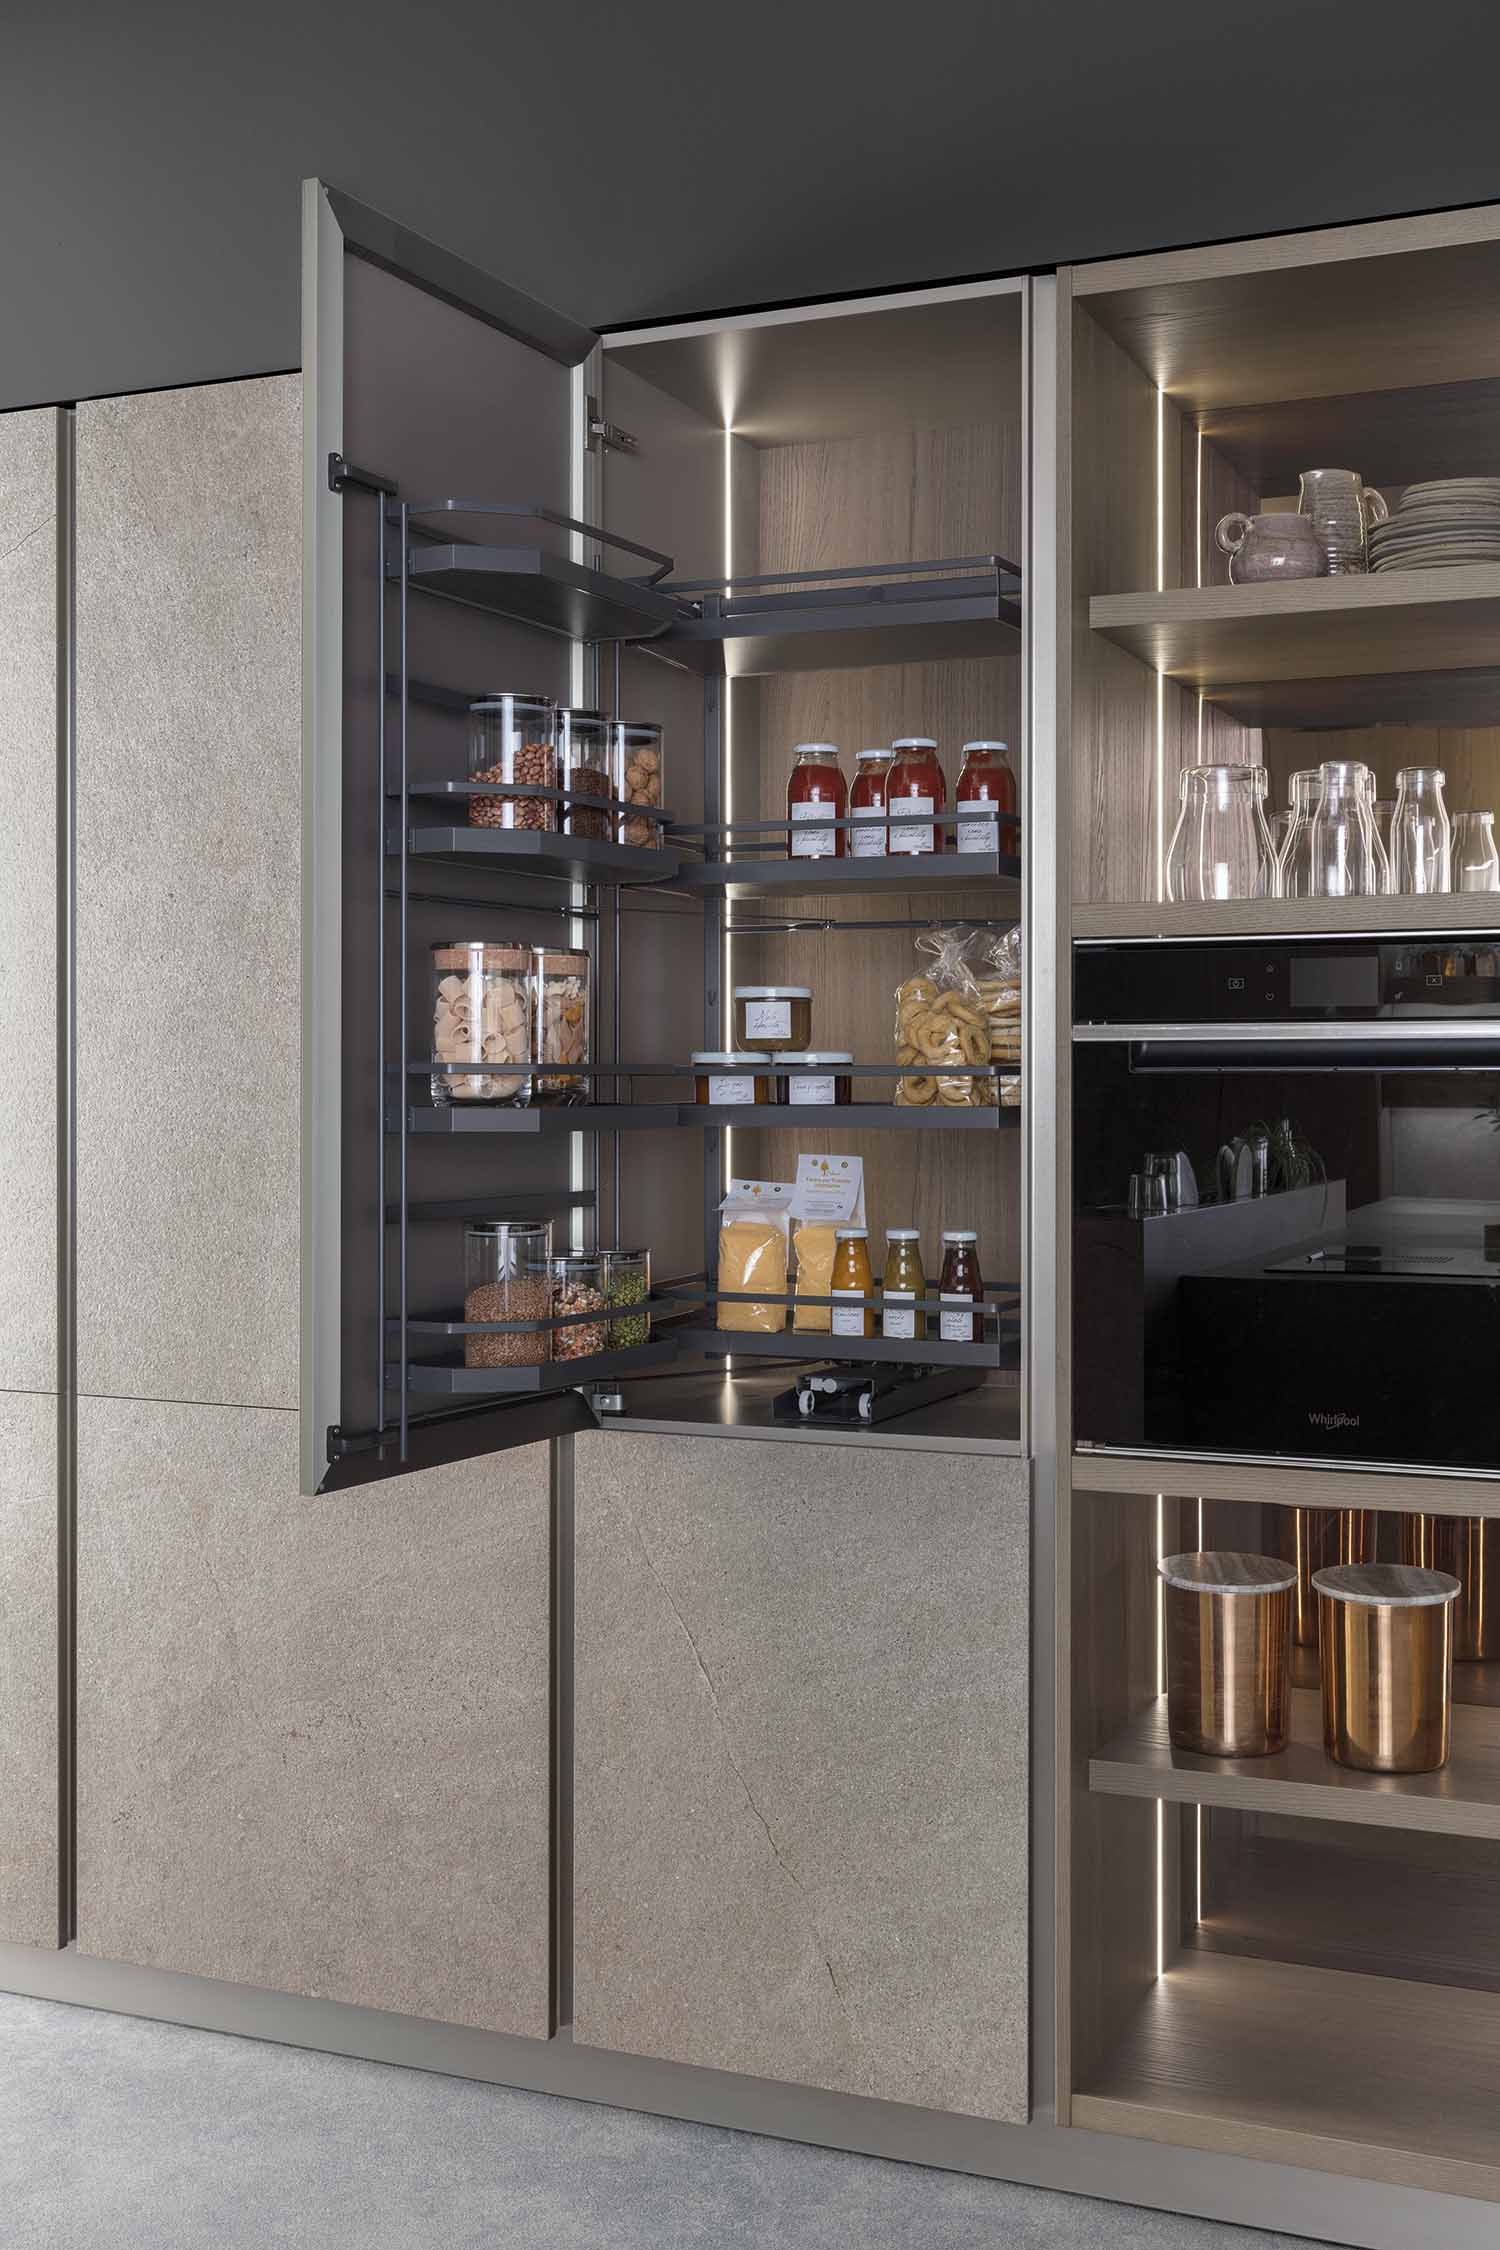 Tall unit with tandem mechanism: order, ease of access and a complete view of the pantry space that, simply by opening it, comes out into fullview.